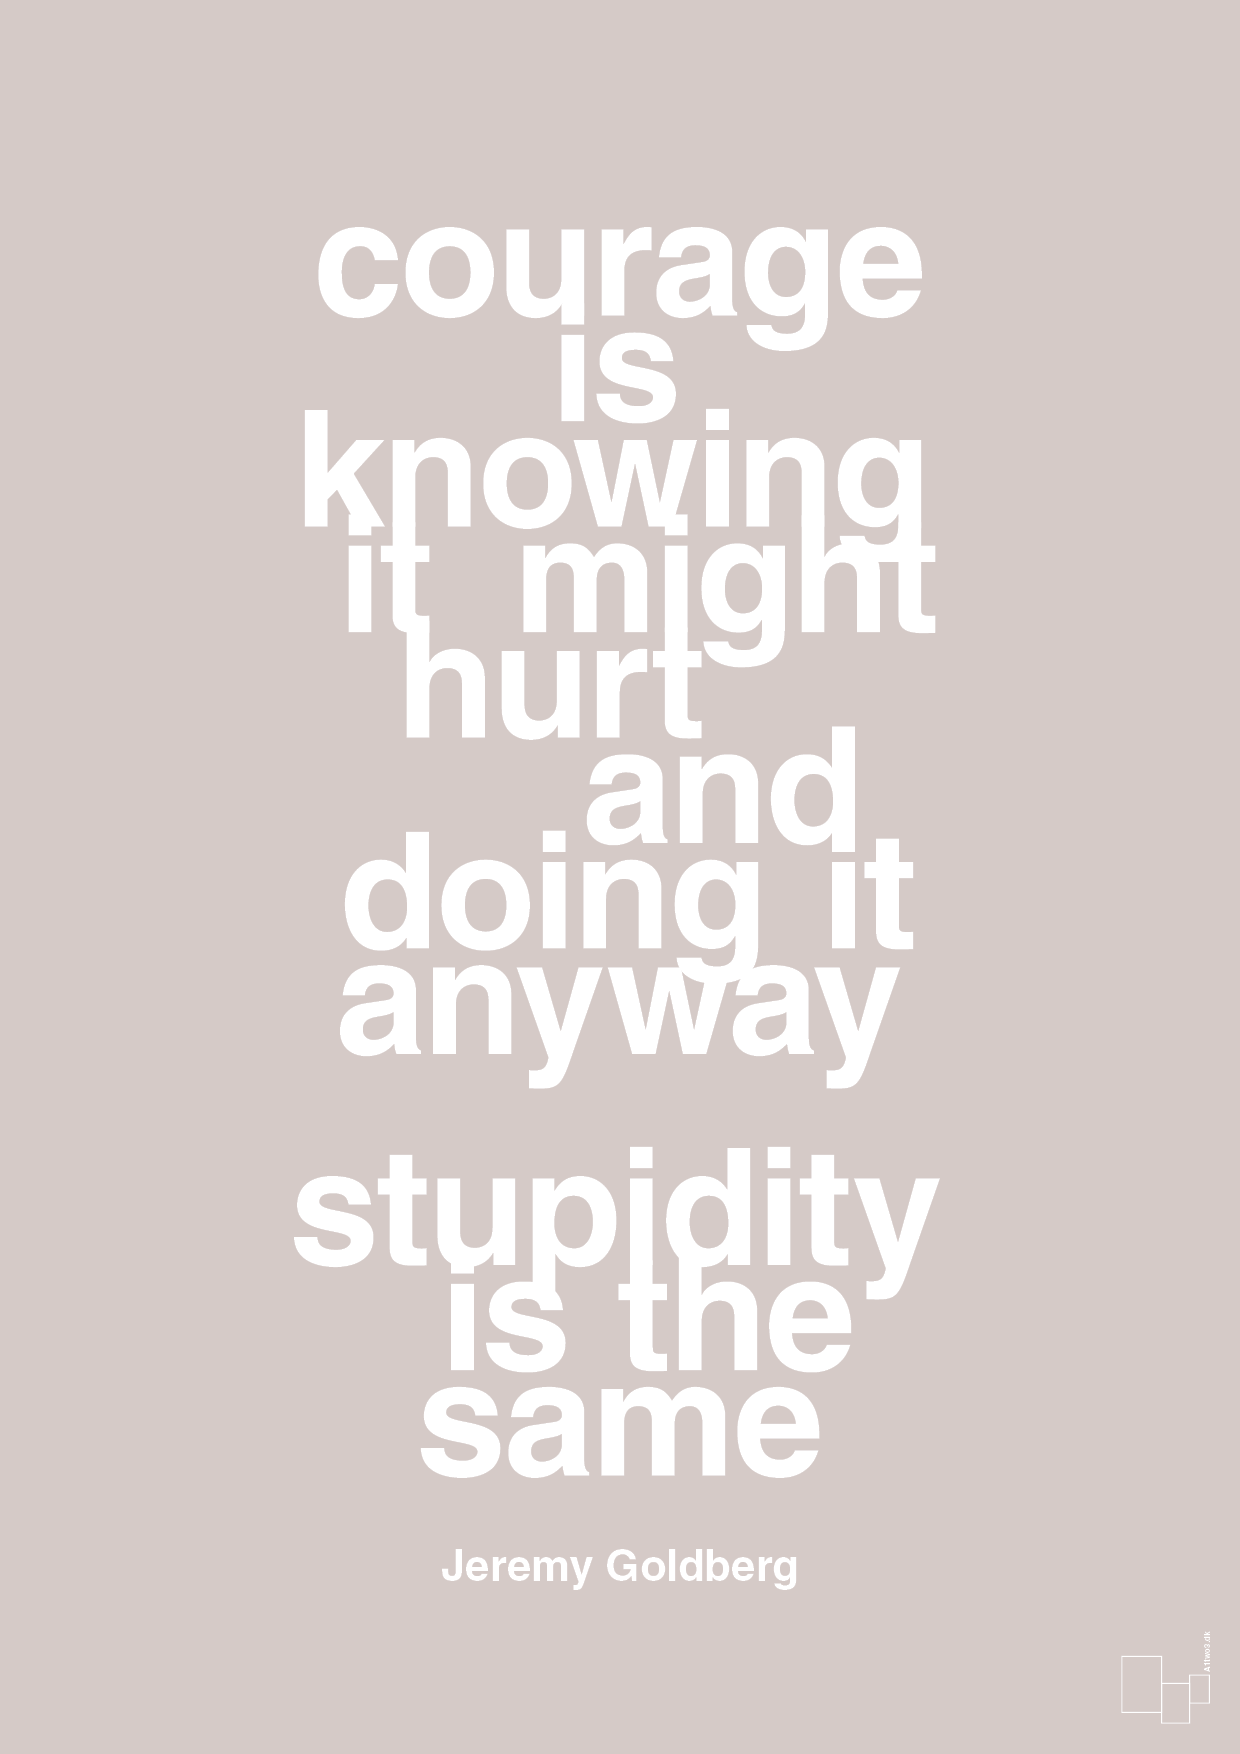 courage is knowing it might hurt and doing it anyway stupidity is the same - Plakat med Citater i Broken Beige